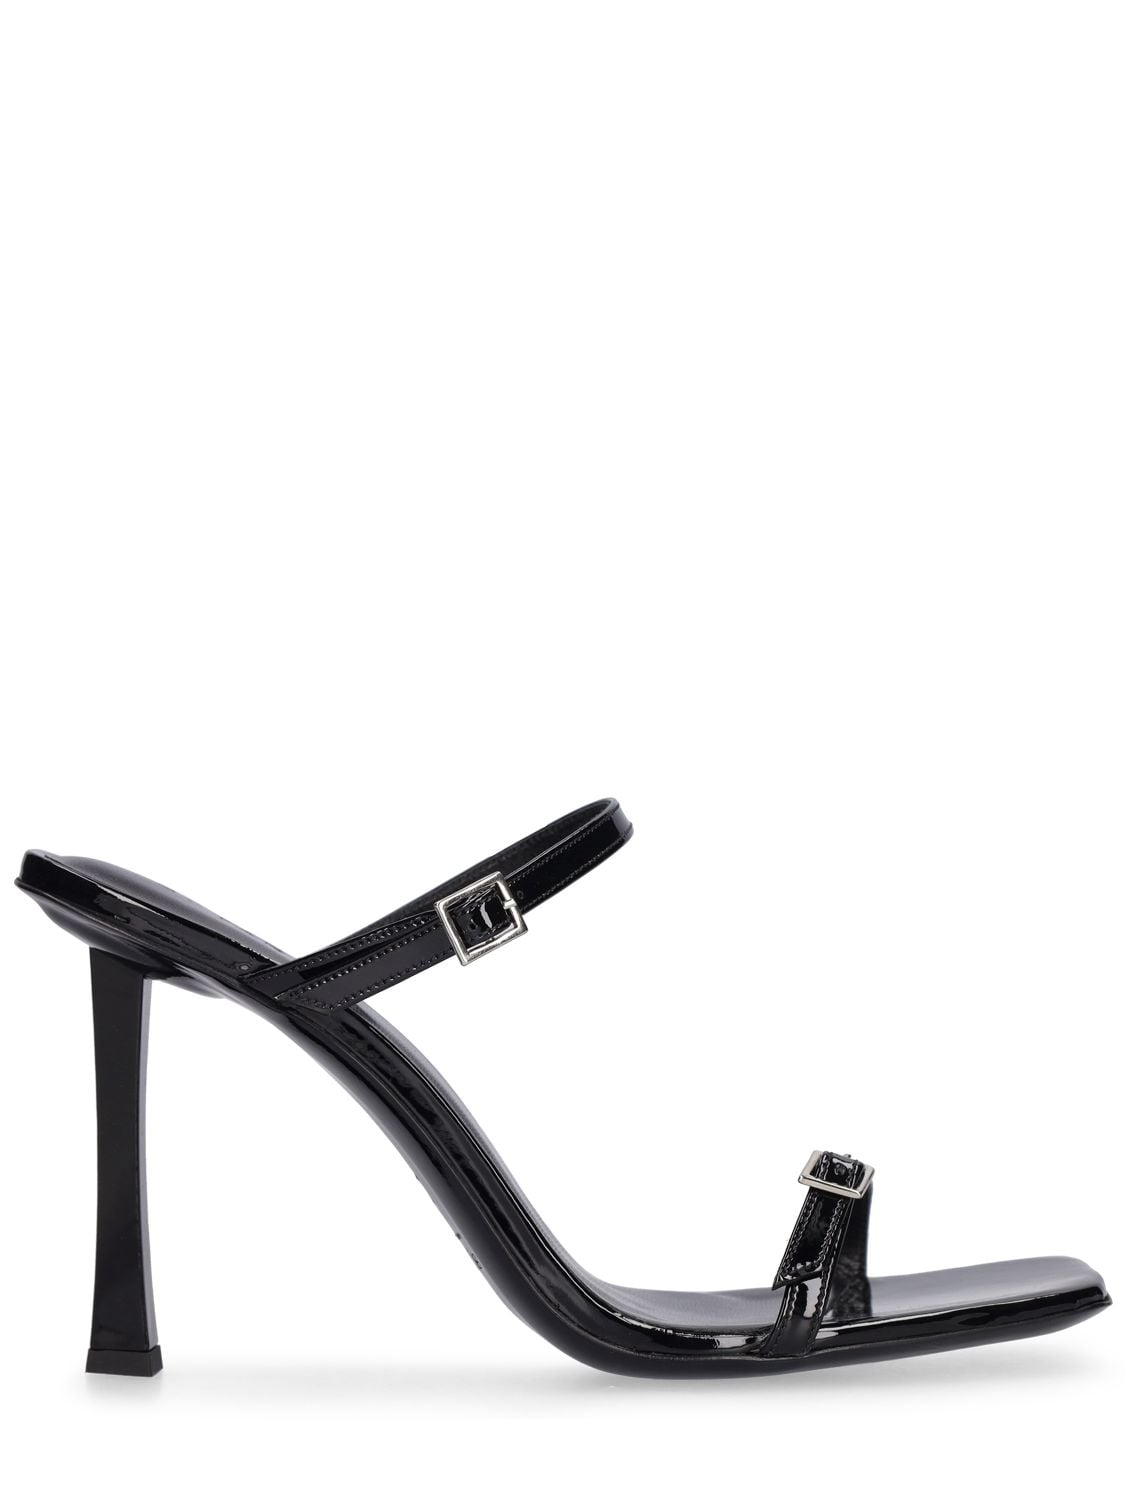 BY FAR 90MM FLICK PATENT LEATHER SANDALS